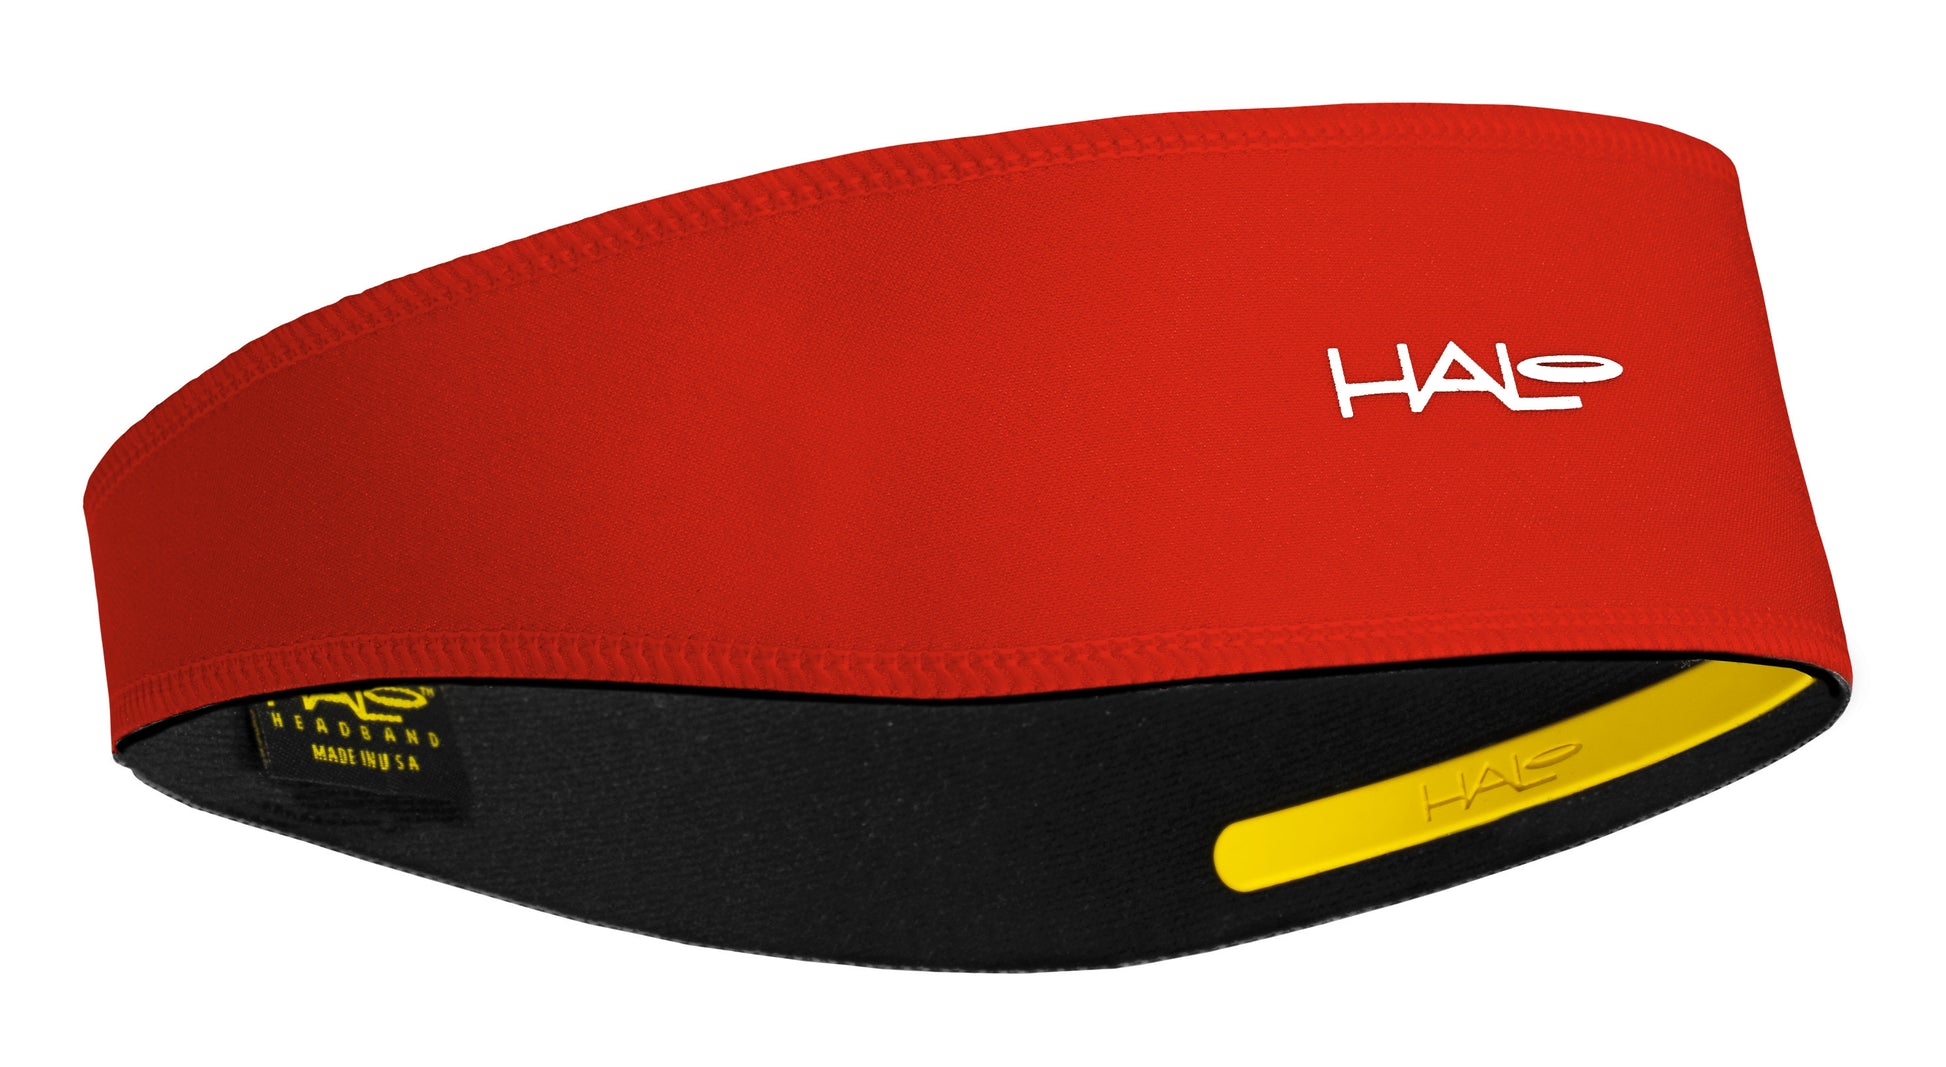 Halo II pull over Head band in red